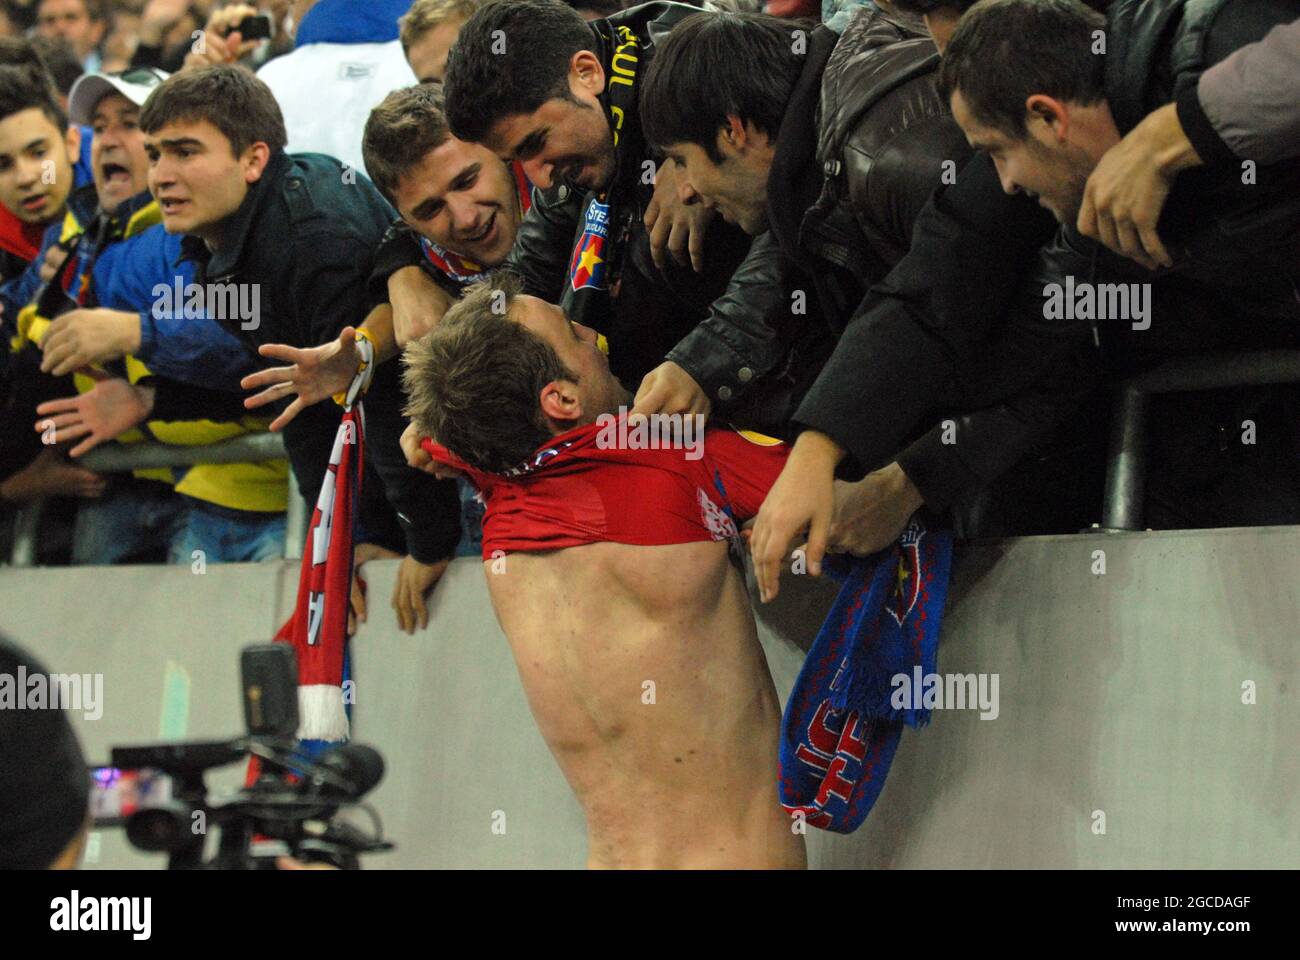 BUCHAREST, ROMANIA - NOVEMBER 3, 2011: FCSB fans try to take the shirt off from Novak Martinovic after the UEFA Europa League Group J game between FCSB and Maccabi Haifa at National Arena. Stock Photo